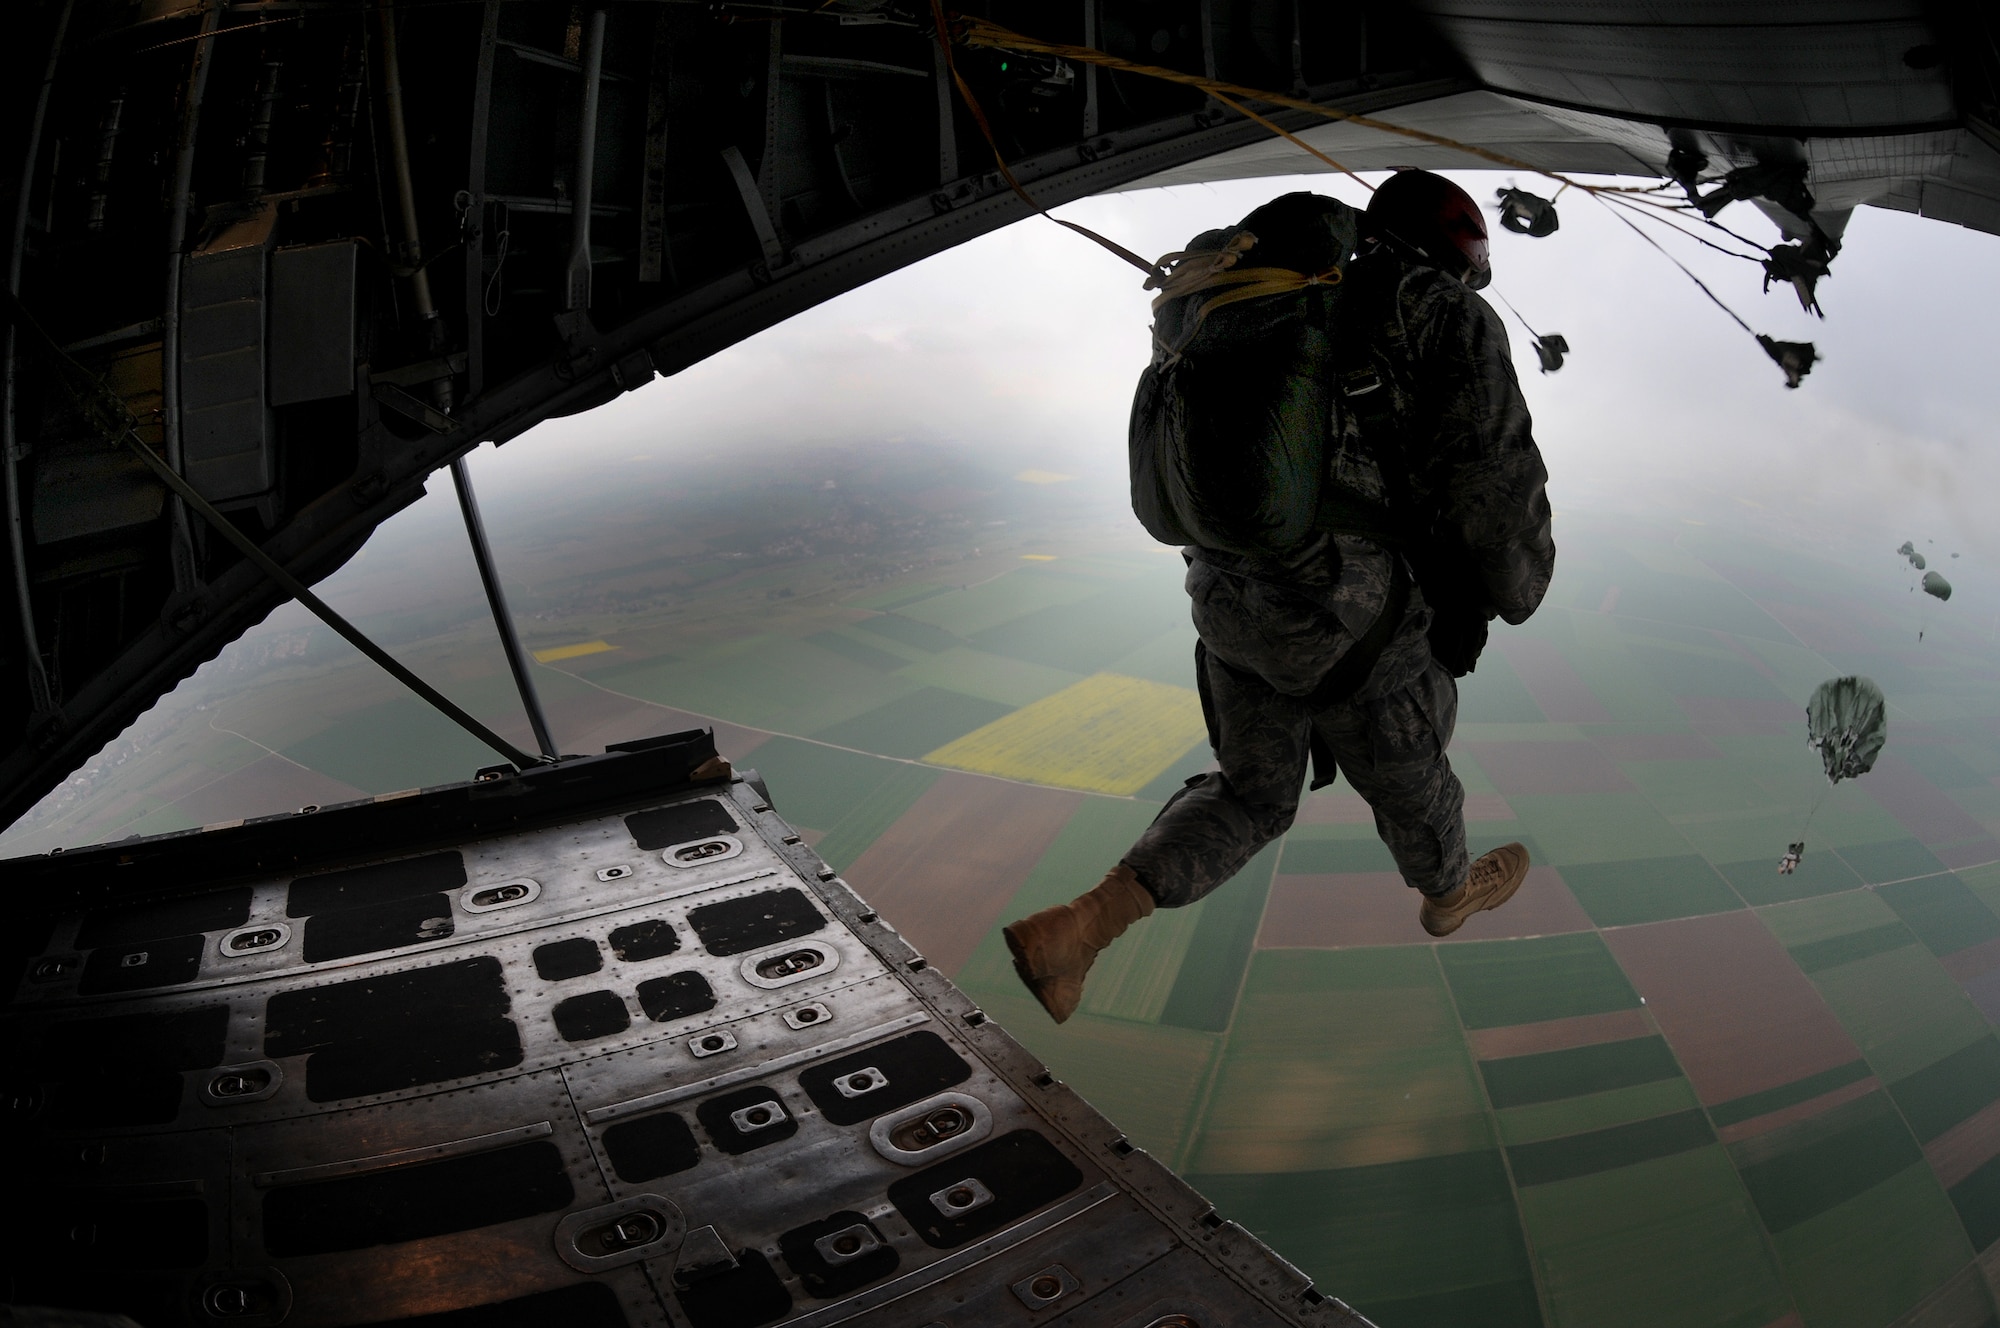 United States Air Force paratroopers execute a jump out the back of a C-130E Hercules over southern Germany, April 30, 2009. The jump was conducted as part of the celebration for the Contingency Readiness Group's 10th anniversary. (U.S. Air Force photo by Airman 1st Class Grovert Fuentes-Contreras)